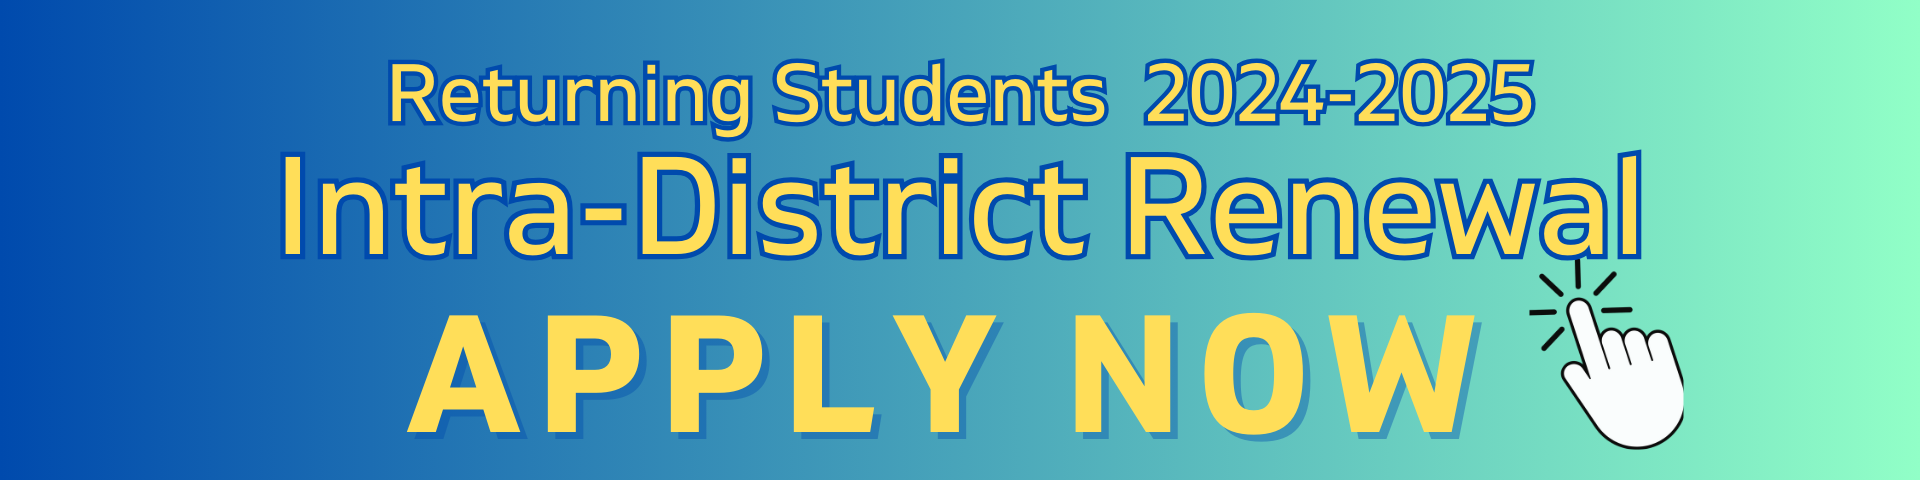 Intra District Renewal Apply Now Button